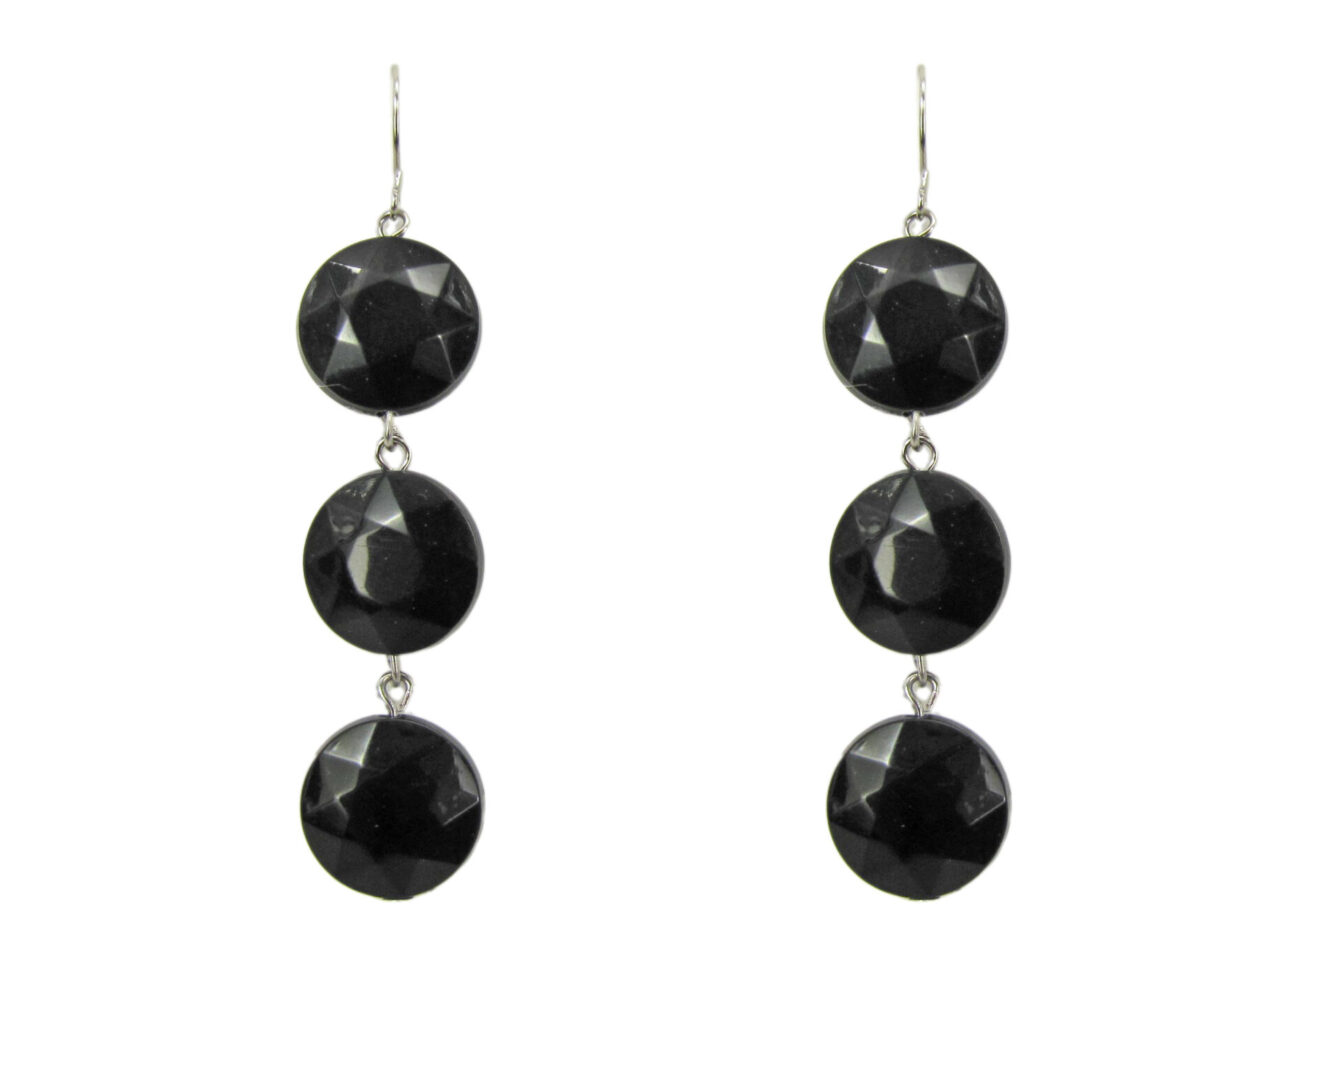 pair of earrings with three rough-cut black stones